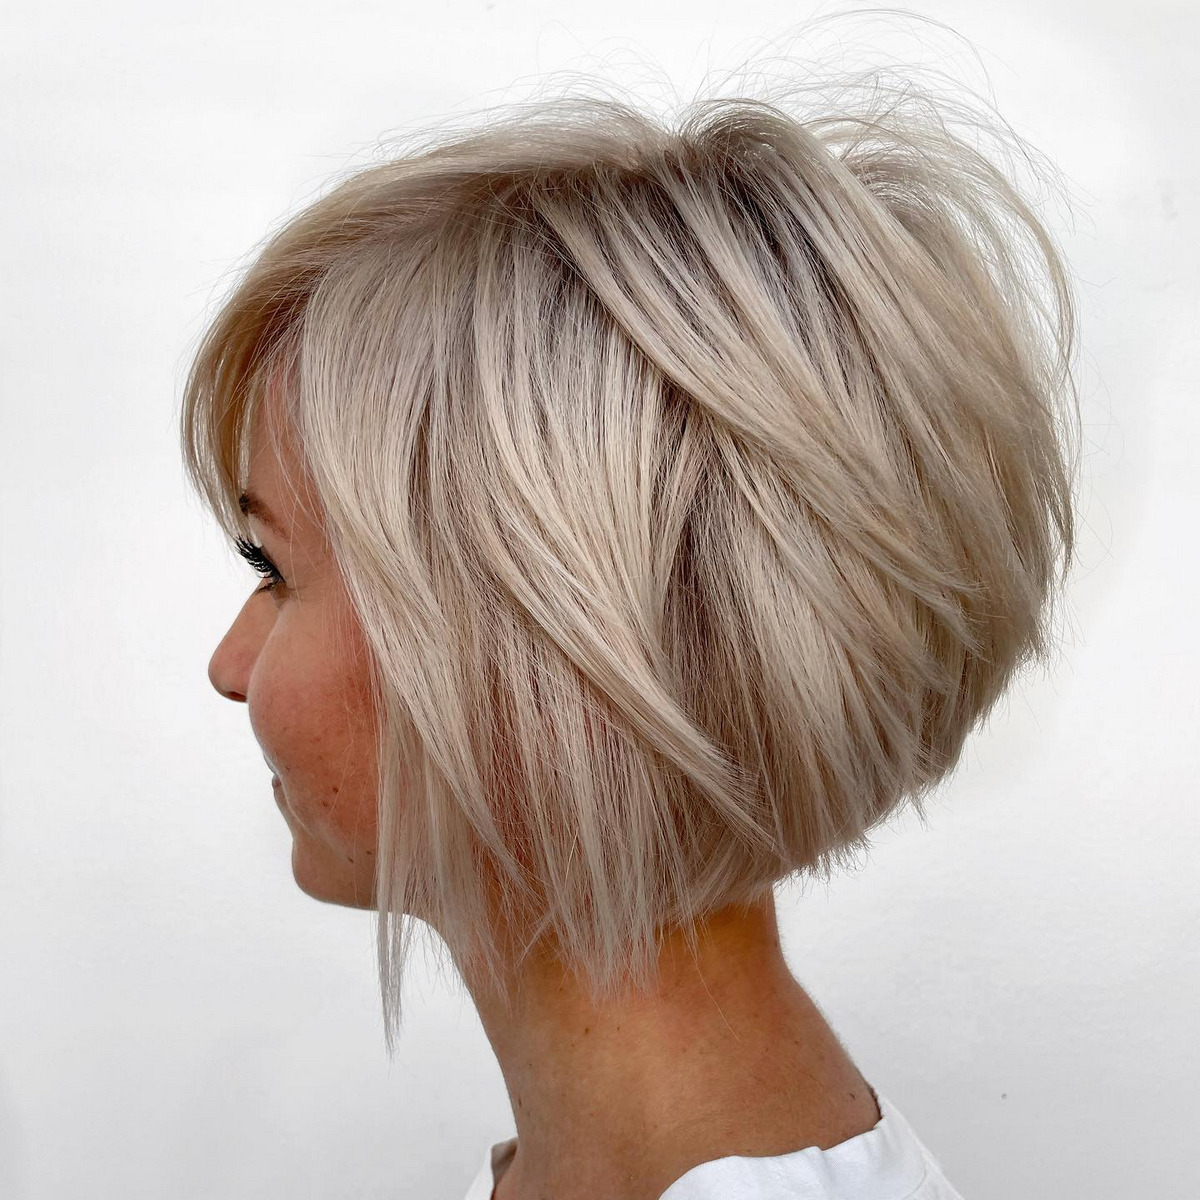 Hottest Short Layered Haircuts for Women - Short Hairstyle Ideas | Thick  hair styles, Short hair haircuts, Short layered haircuts